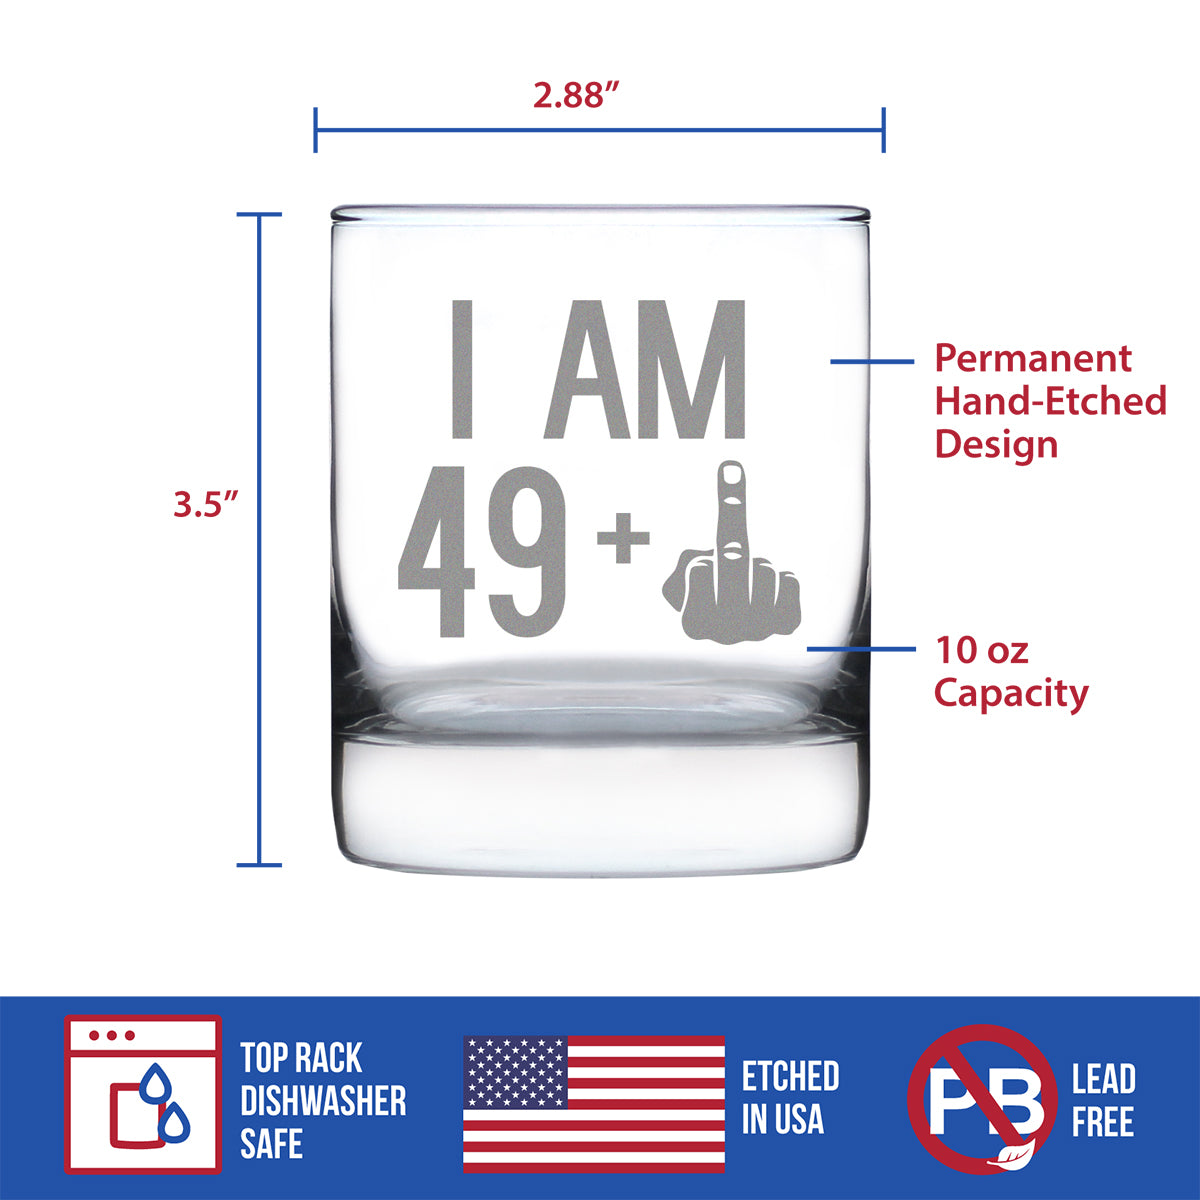 49 + 1 Middle Finger - Funny 50th Birthday Whiskey Rocks Glass Gifts for Men &amp; Women Turning 50 - Fun Whisky Drinking Tumbler